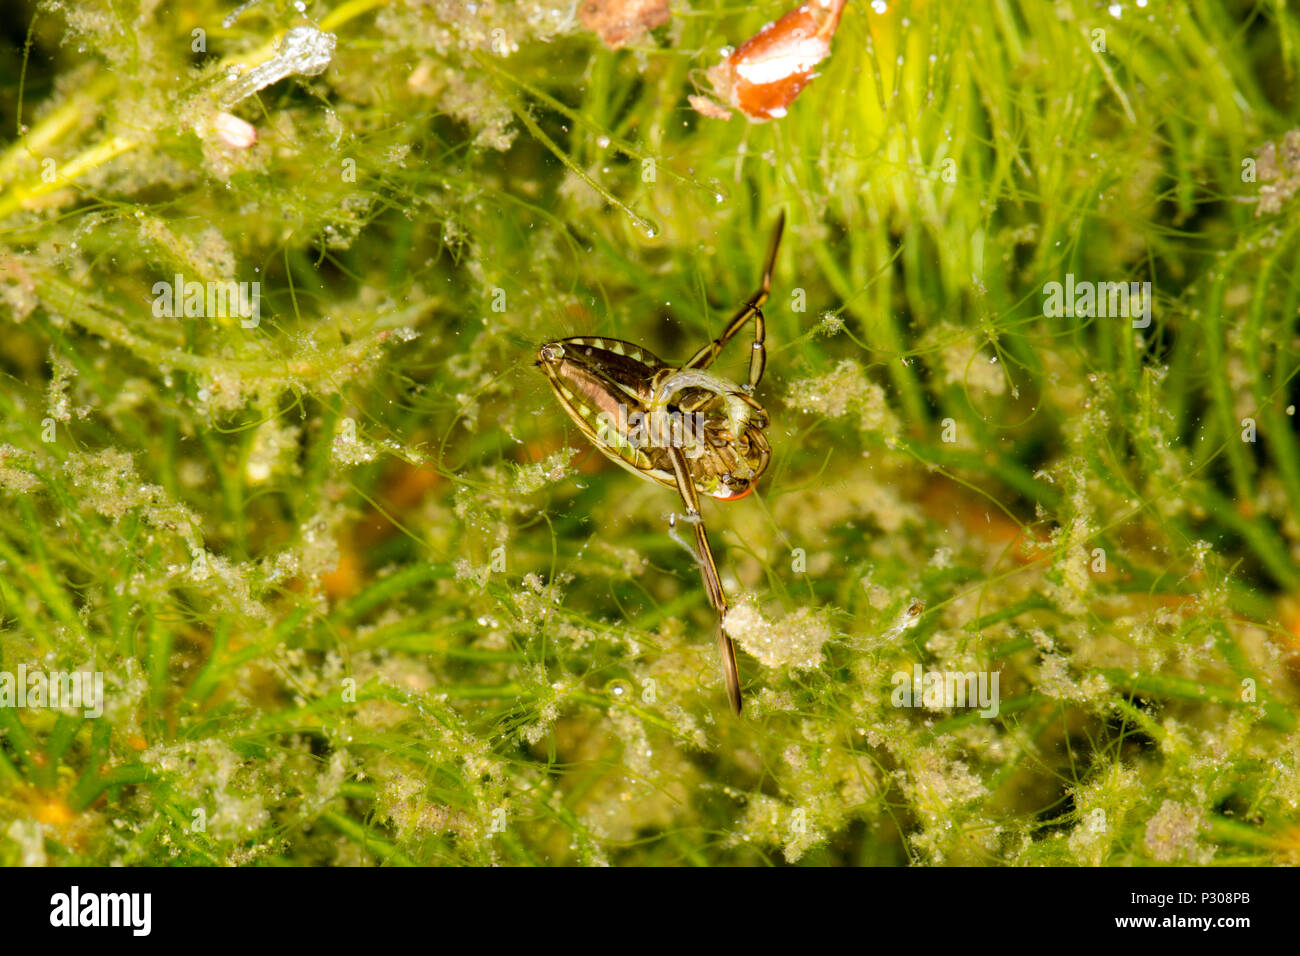 A common water boatman, or backswimmer, Notonecta glauca in a garden pond photographed at night. The water boatman  pictured has captured its prey in  Stock Photo